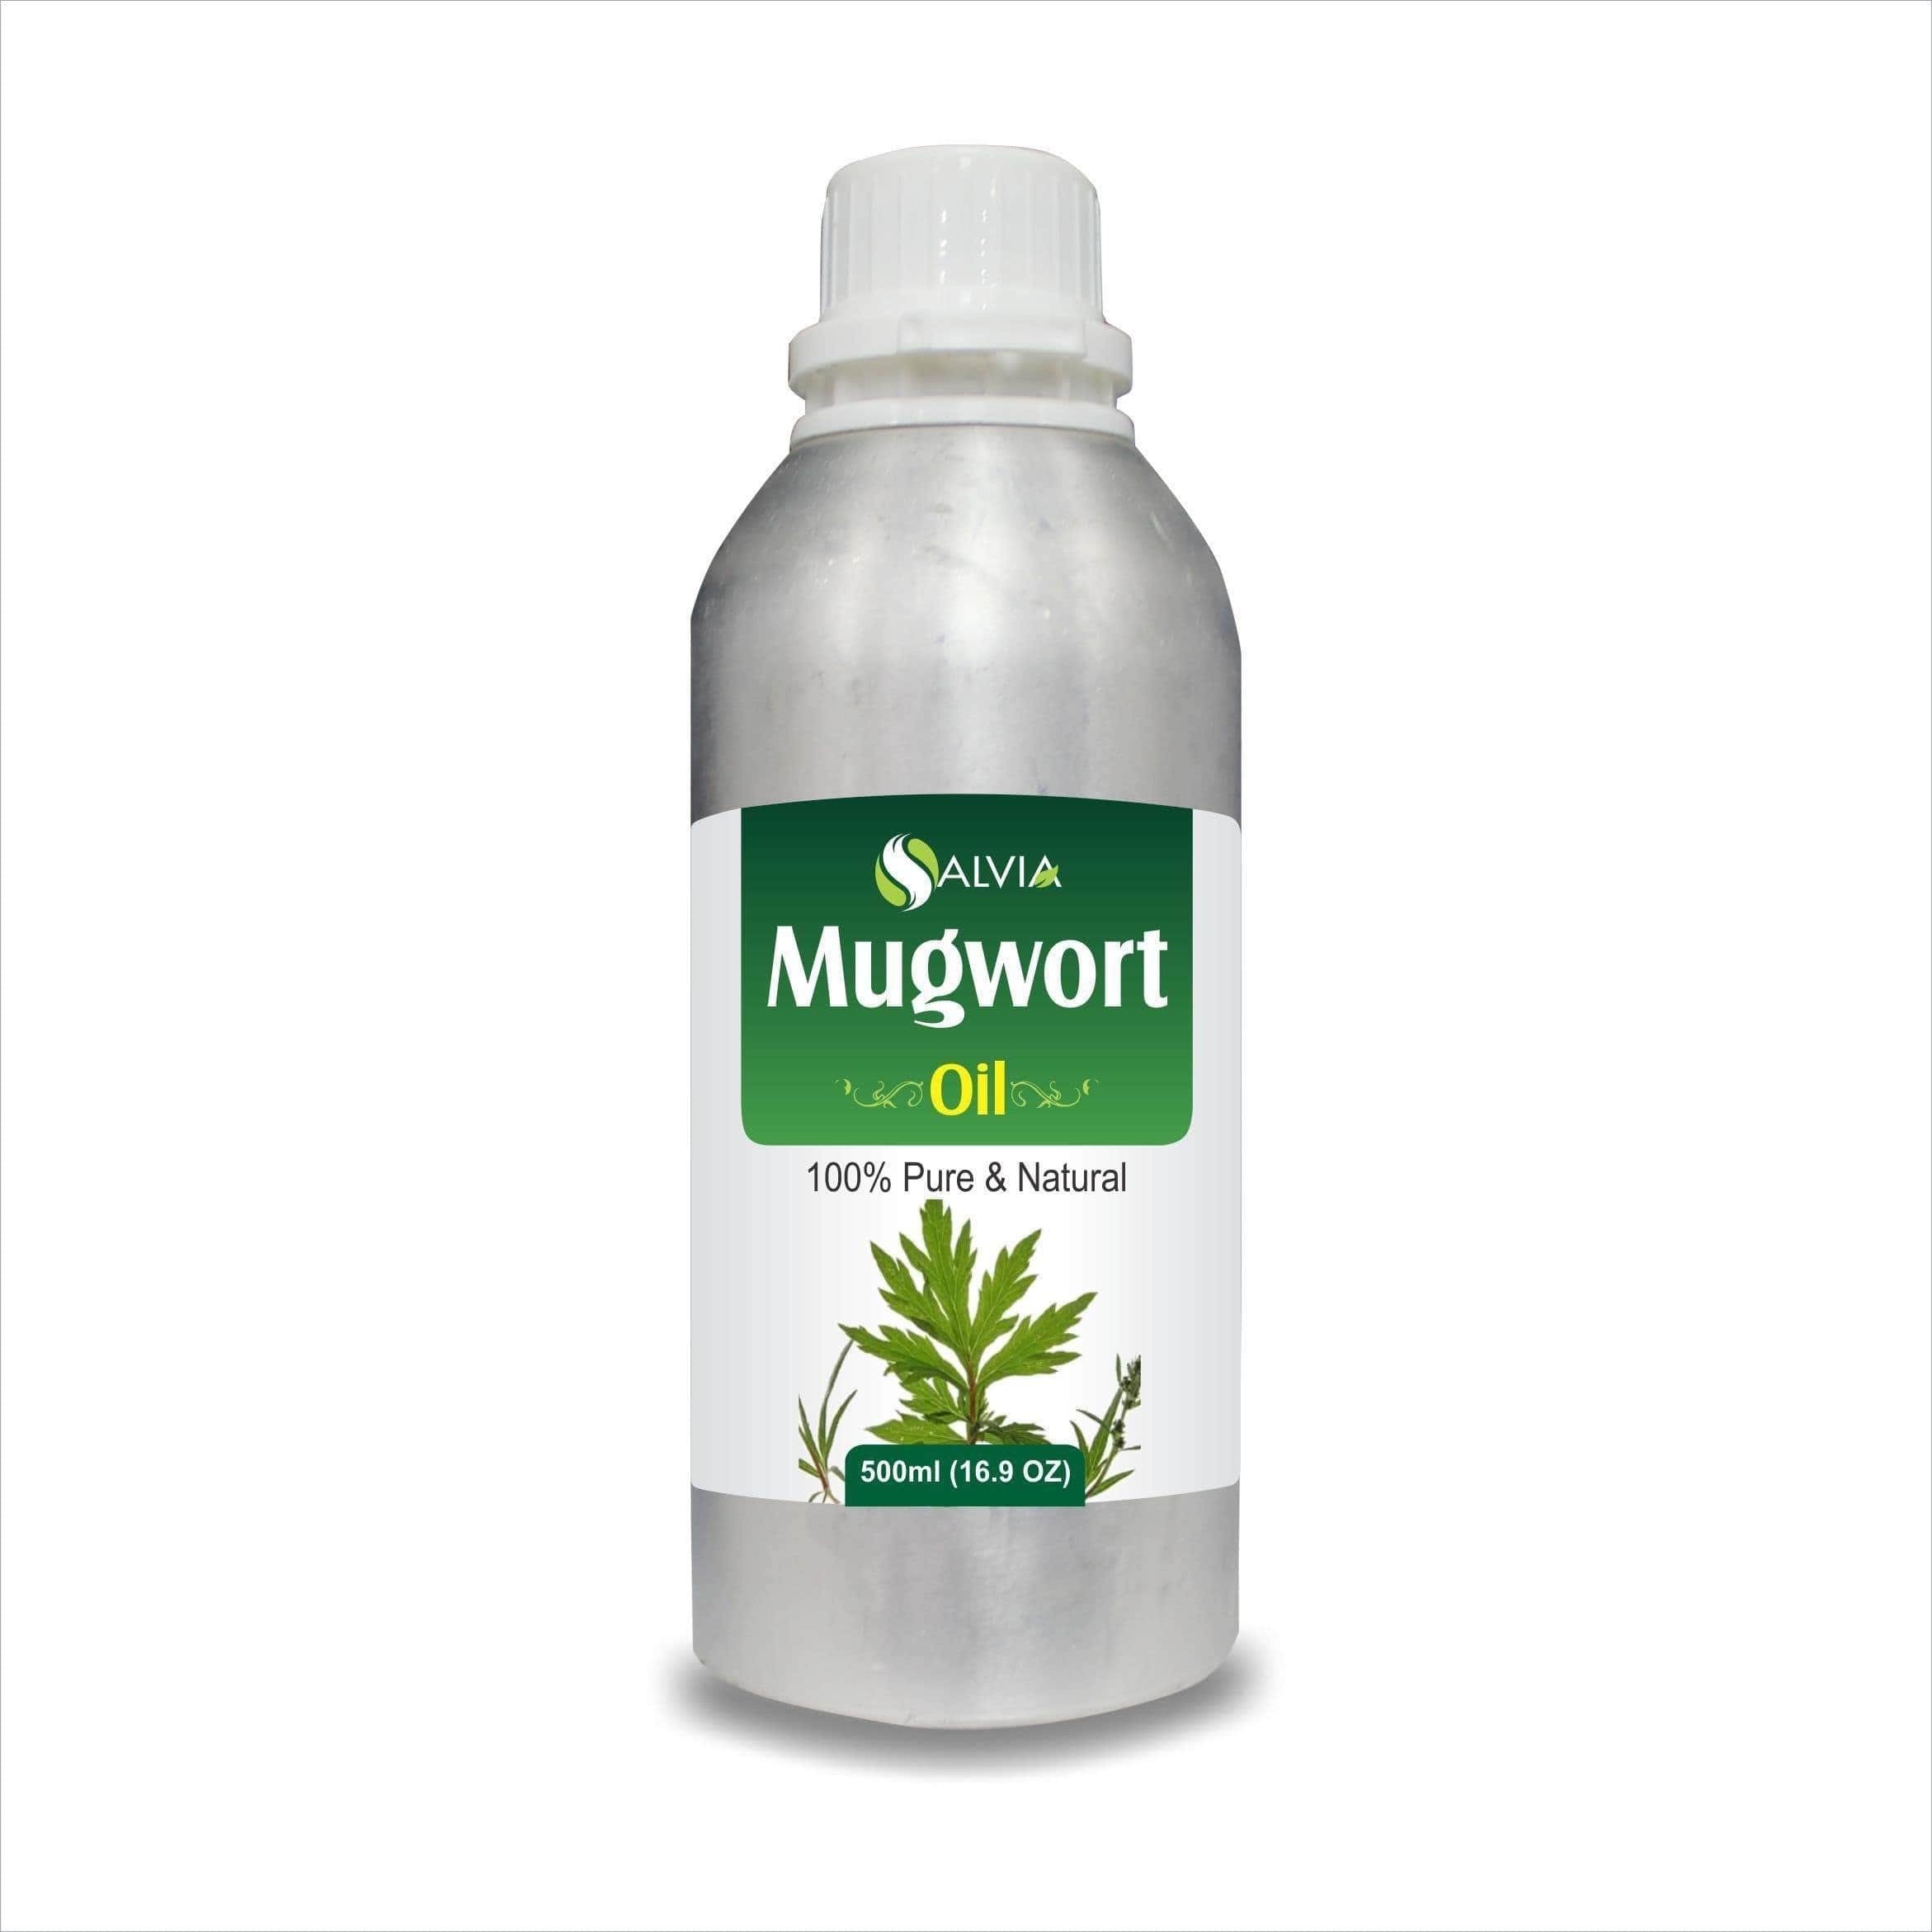 Salvia Natural Essential Oils 500ml Mugwort Oil (Artemisia-Vulgaris) 100% Natural Pure Essential Oil Protects, Nourishes & Hydrates The Skin, Anti-Aging Properties, Removes Excessive Oil in Scalp